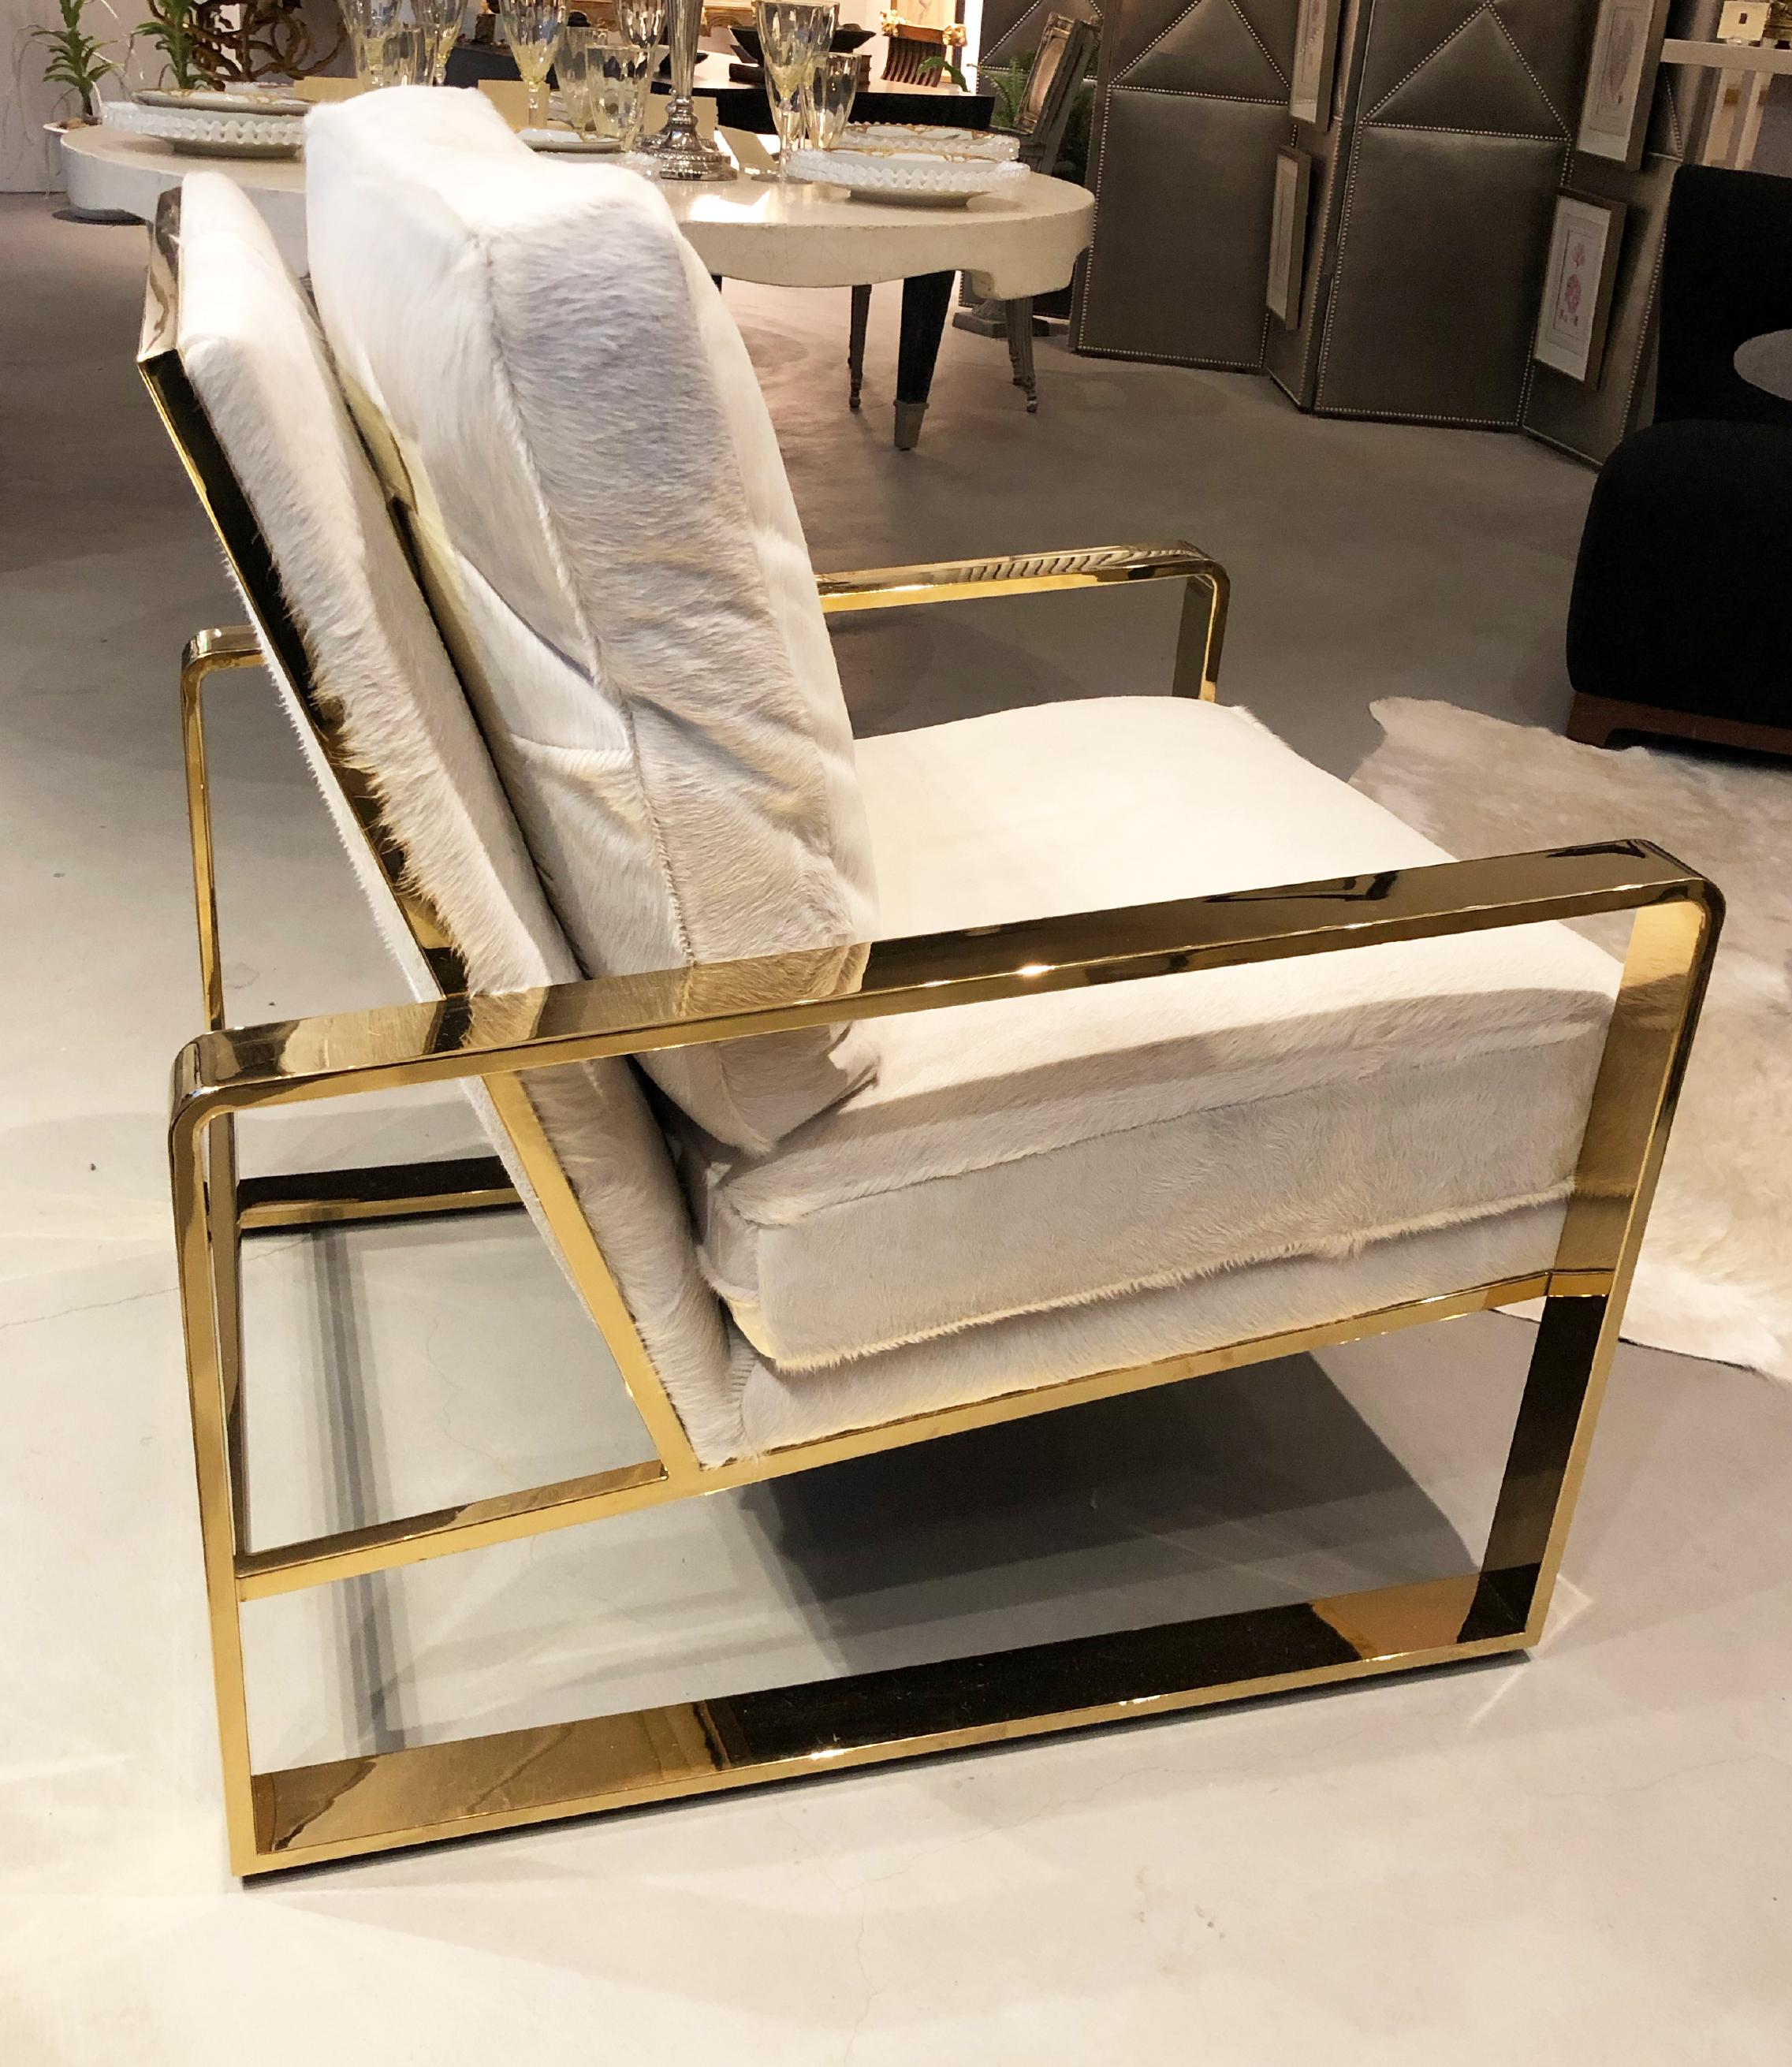 Contemporary club chair with an off-white cowhide upholstery and polished brass frame.